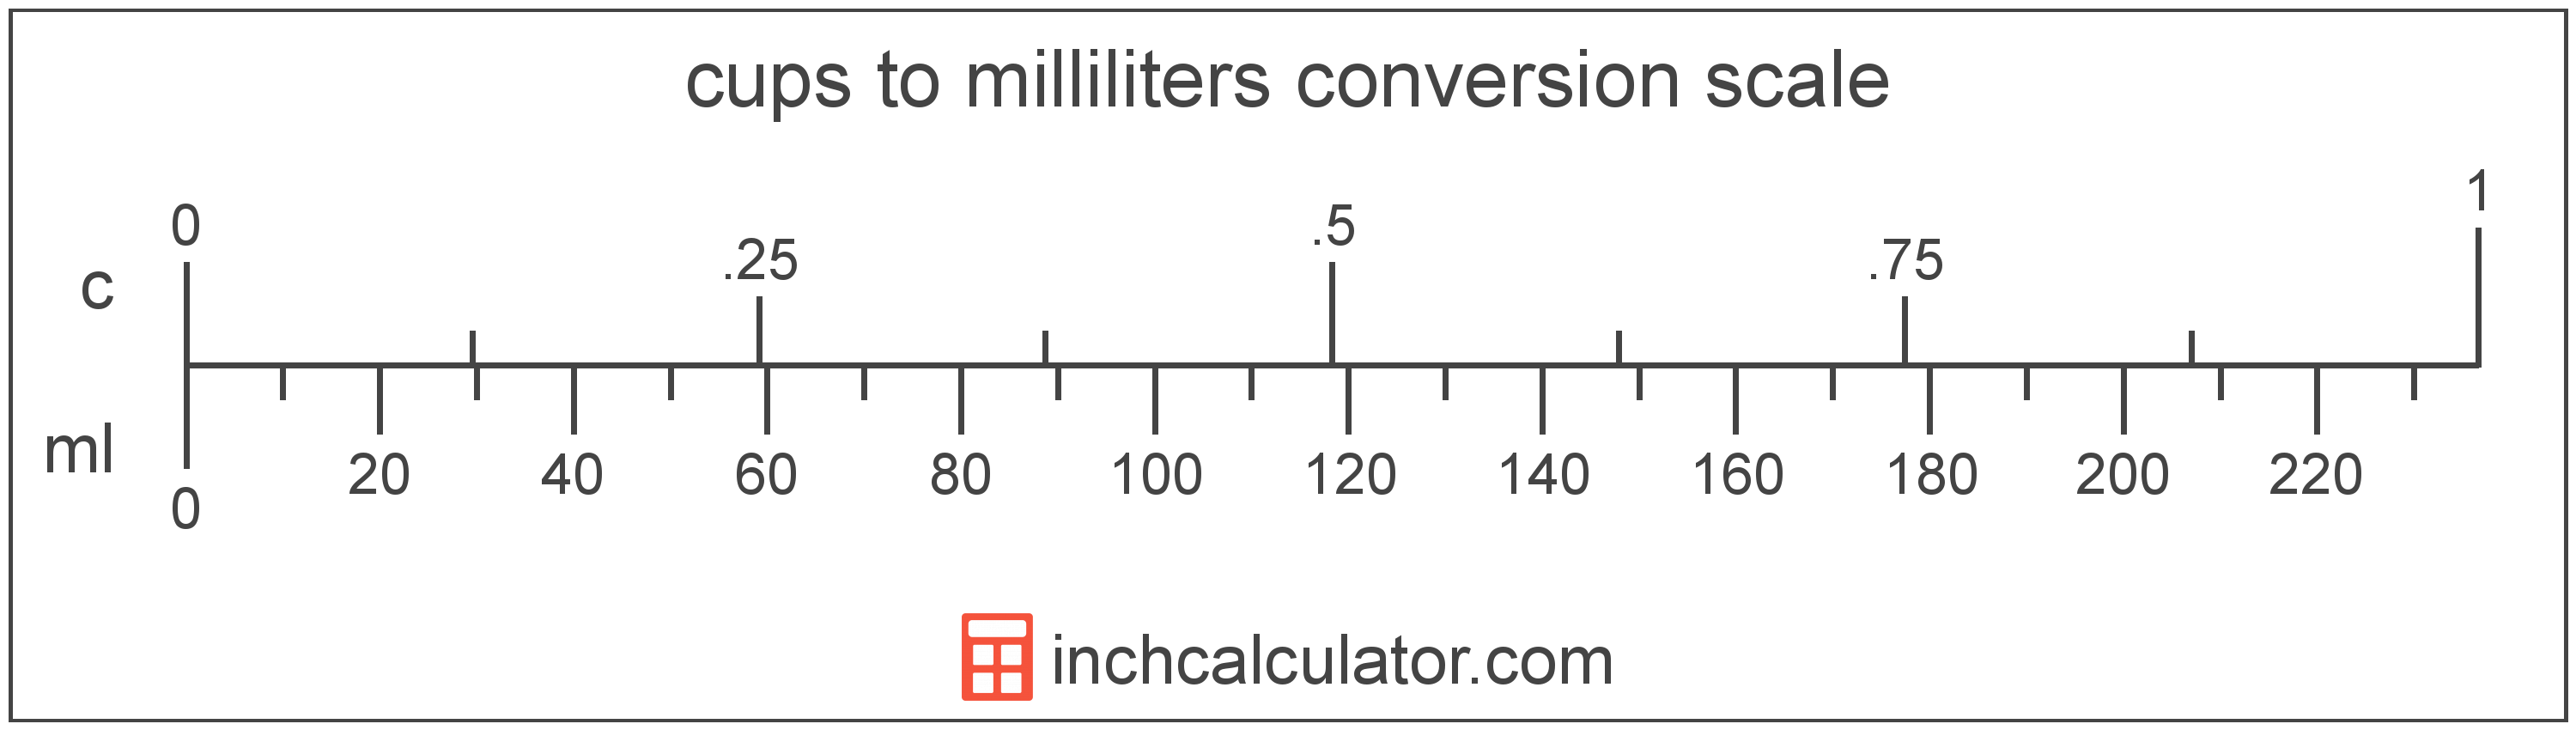 conversion scale showing cups and equivalent milliliters volume values